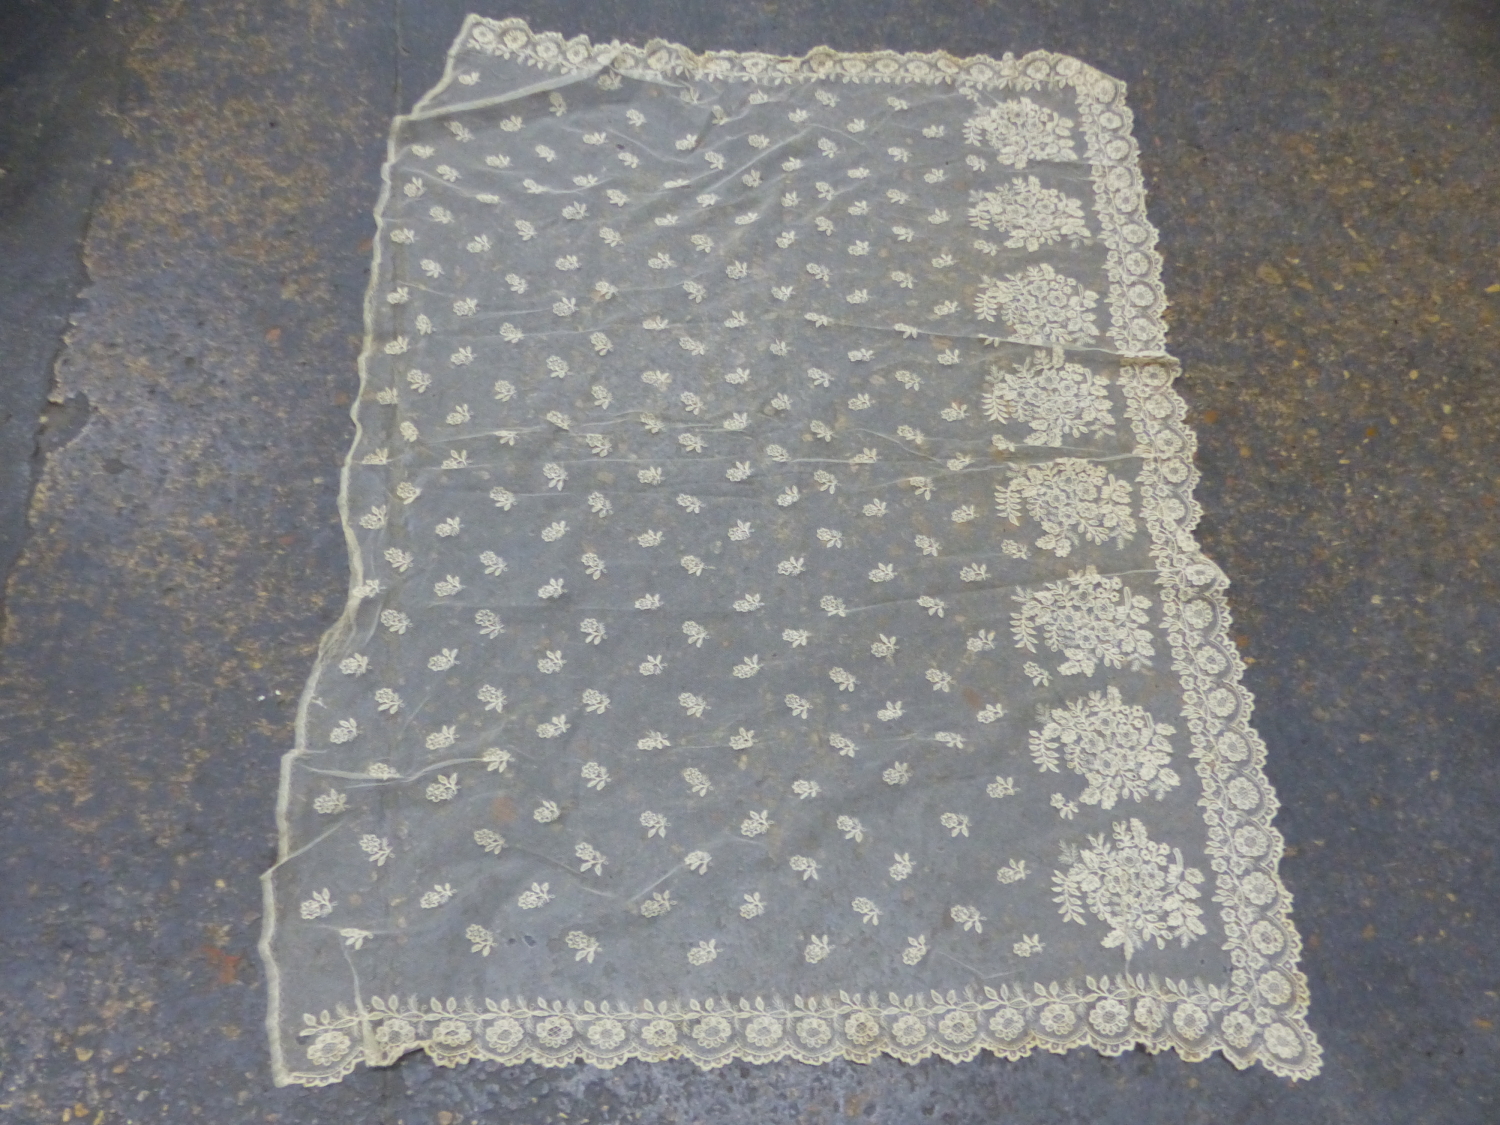 A SMALL COLLECTION OF ANTIQUE AND FINELY WORKED LACE, TO INCLUDE A SHAWL, VEILS, ETC. - Image 13 of 15